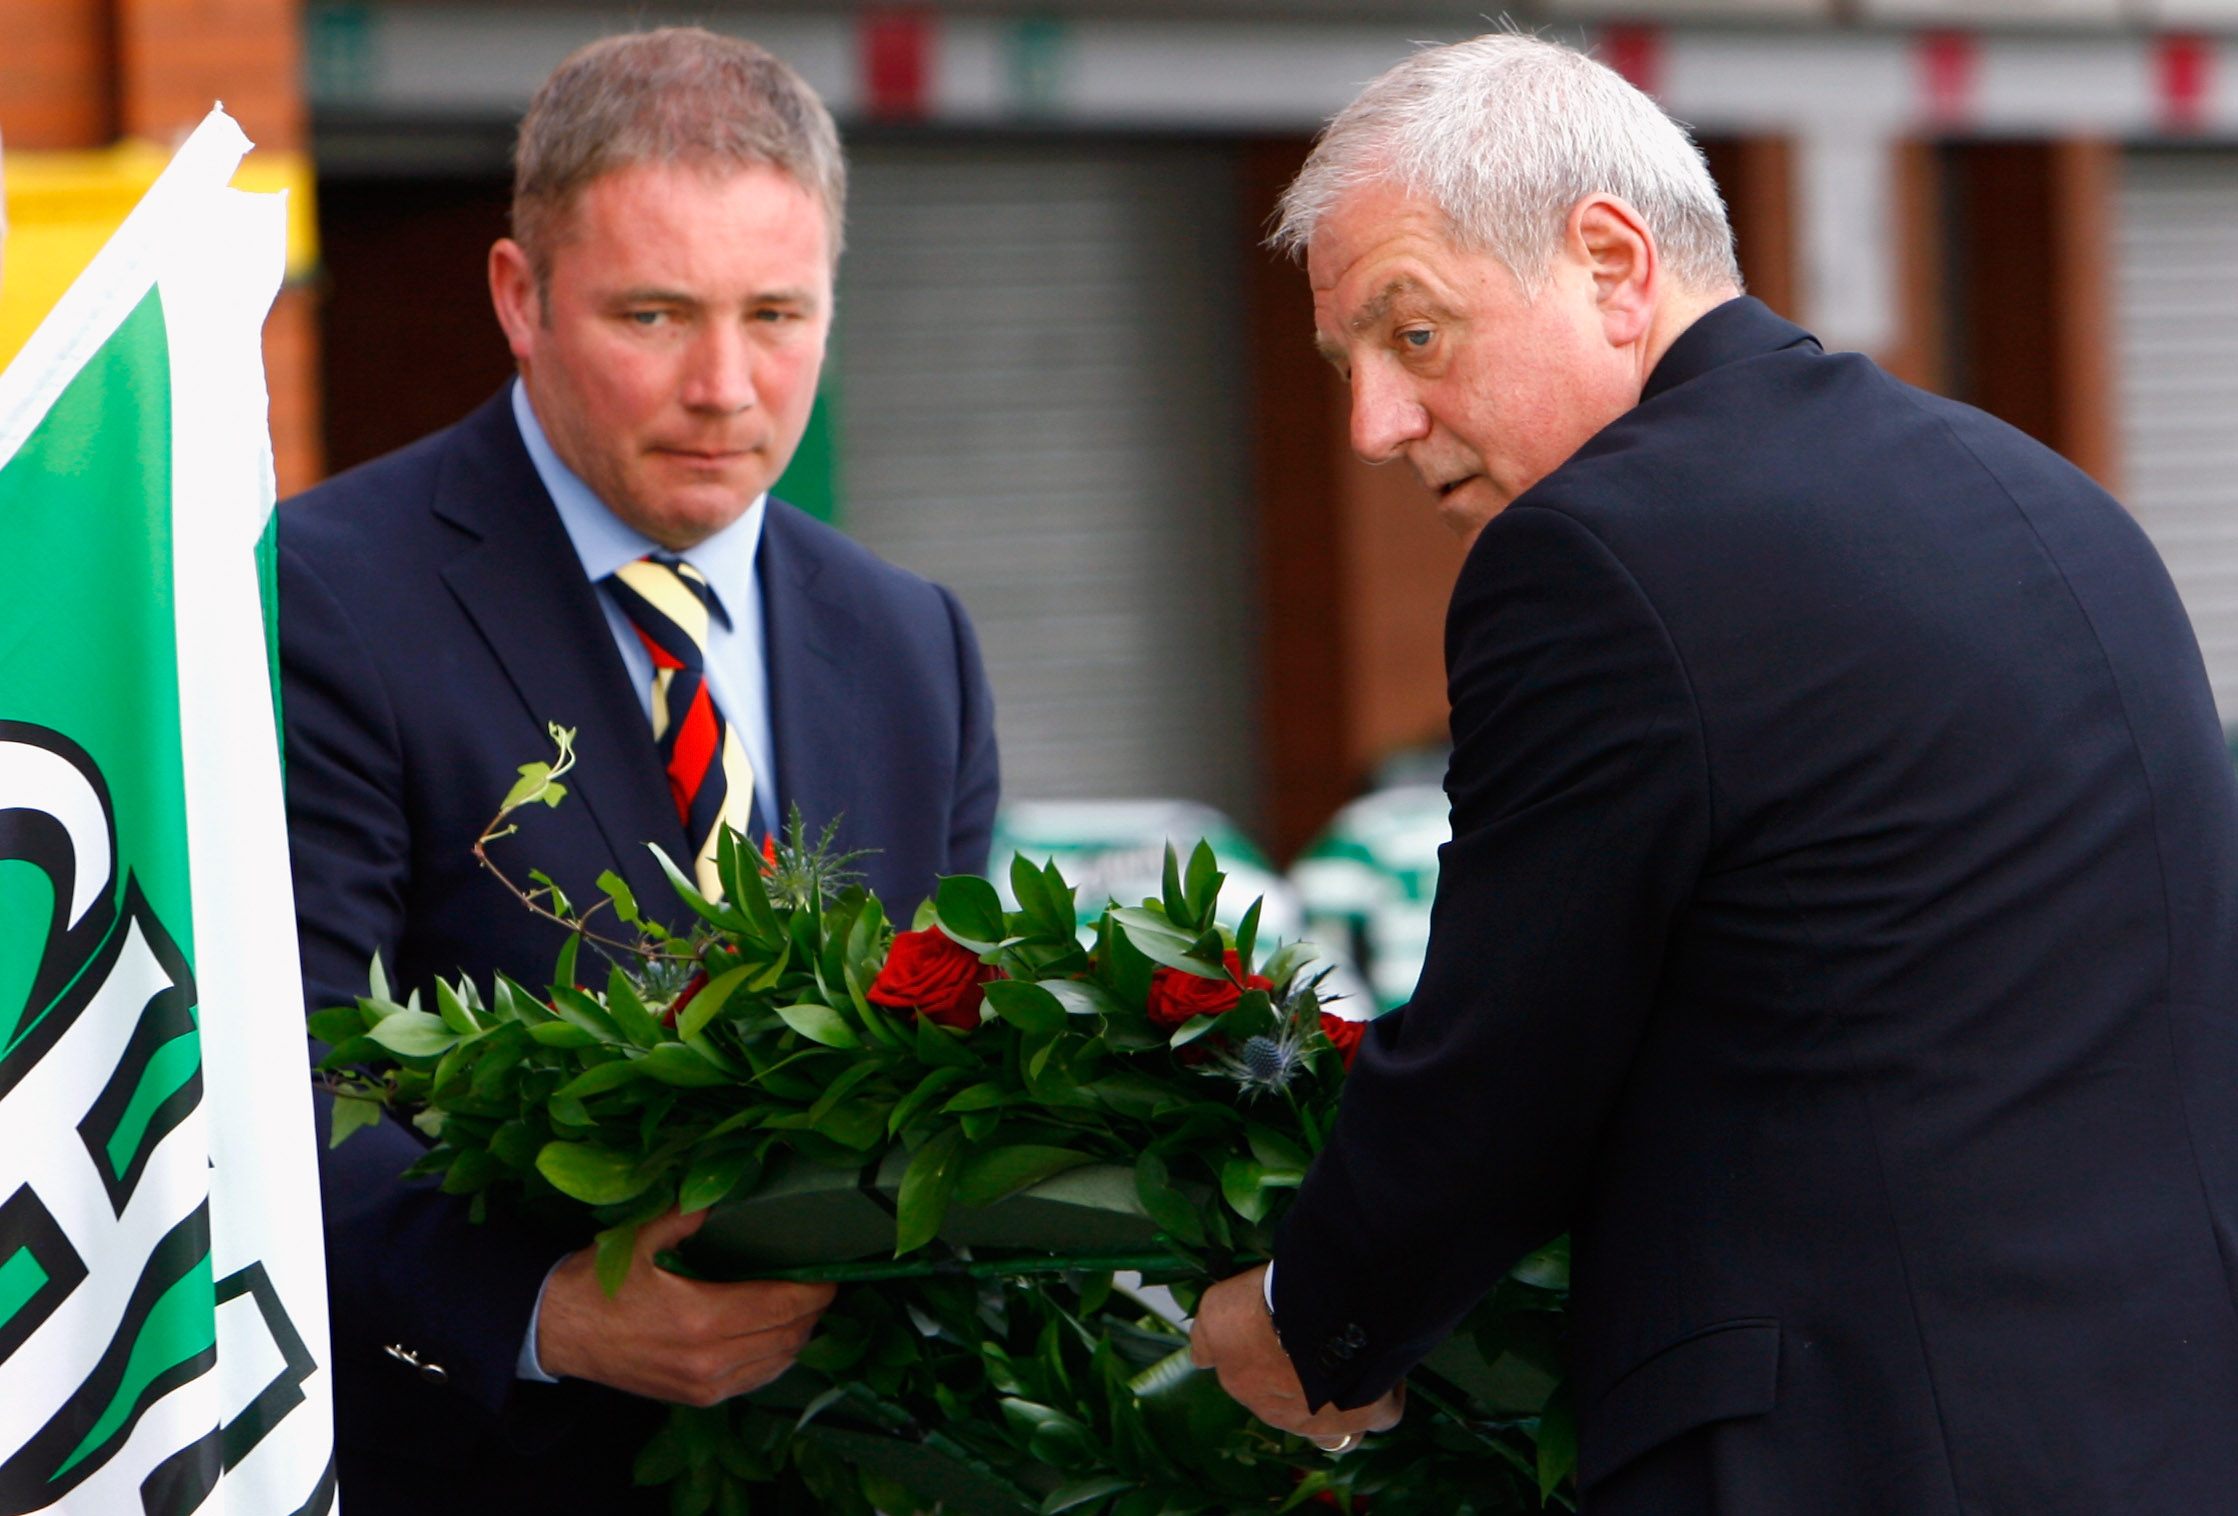 Walter Smith pay tribute to Tommy Burns